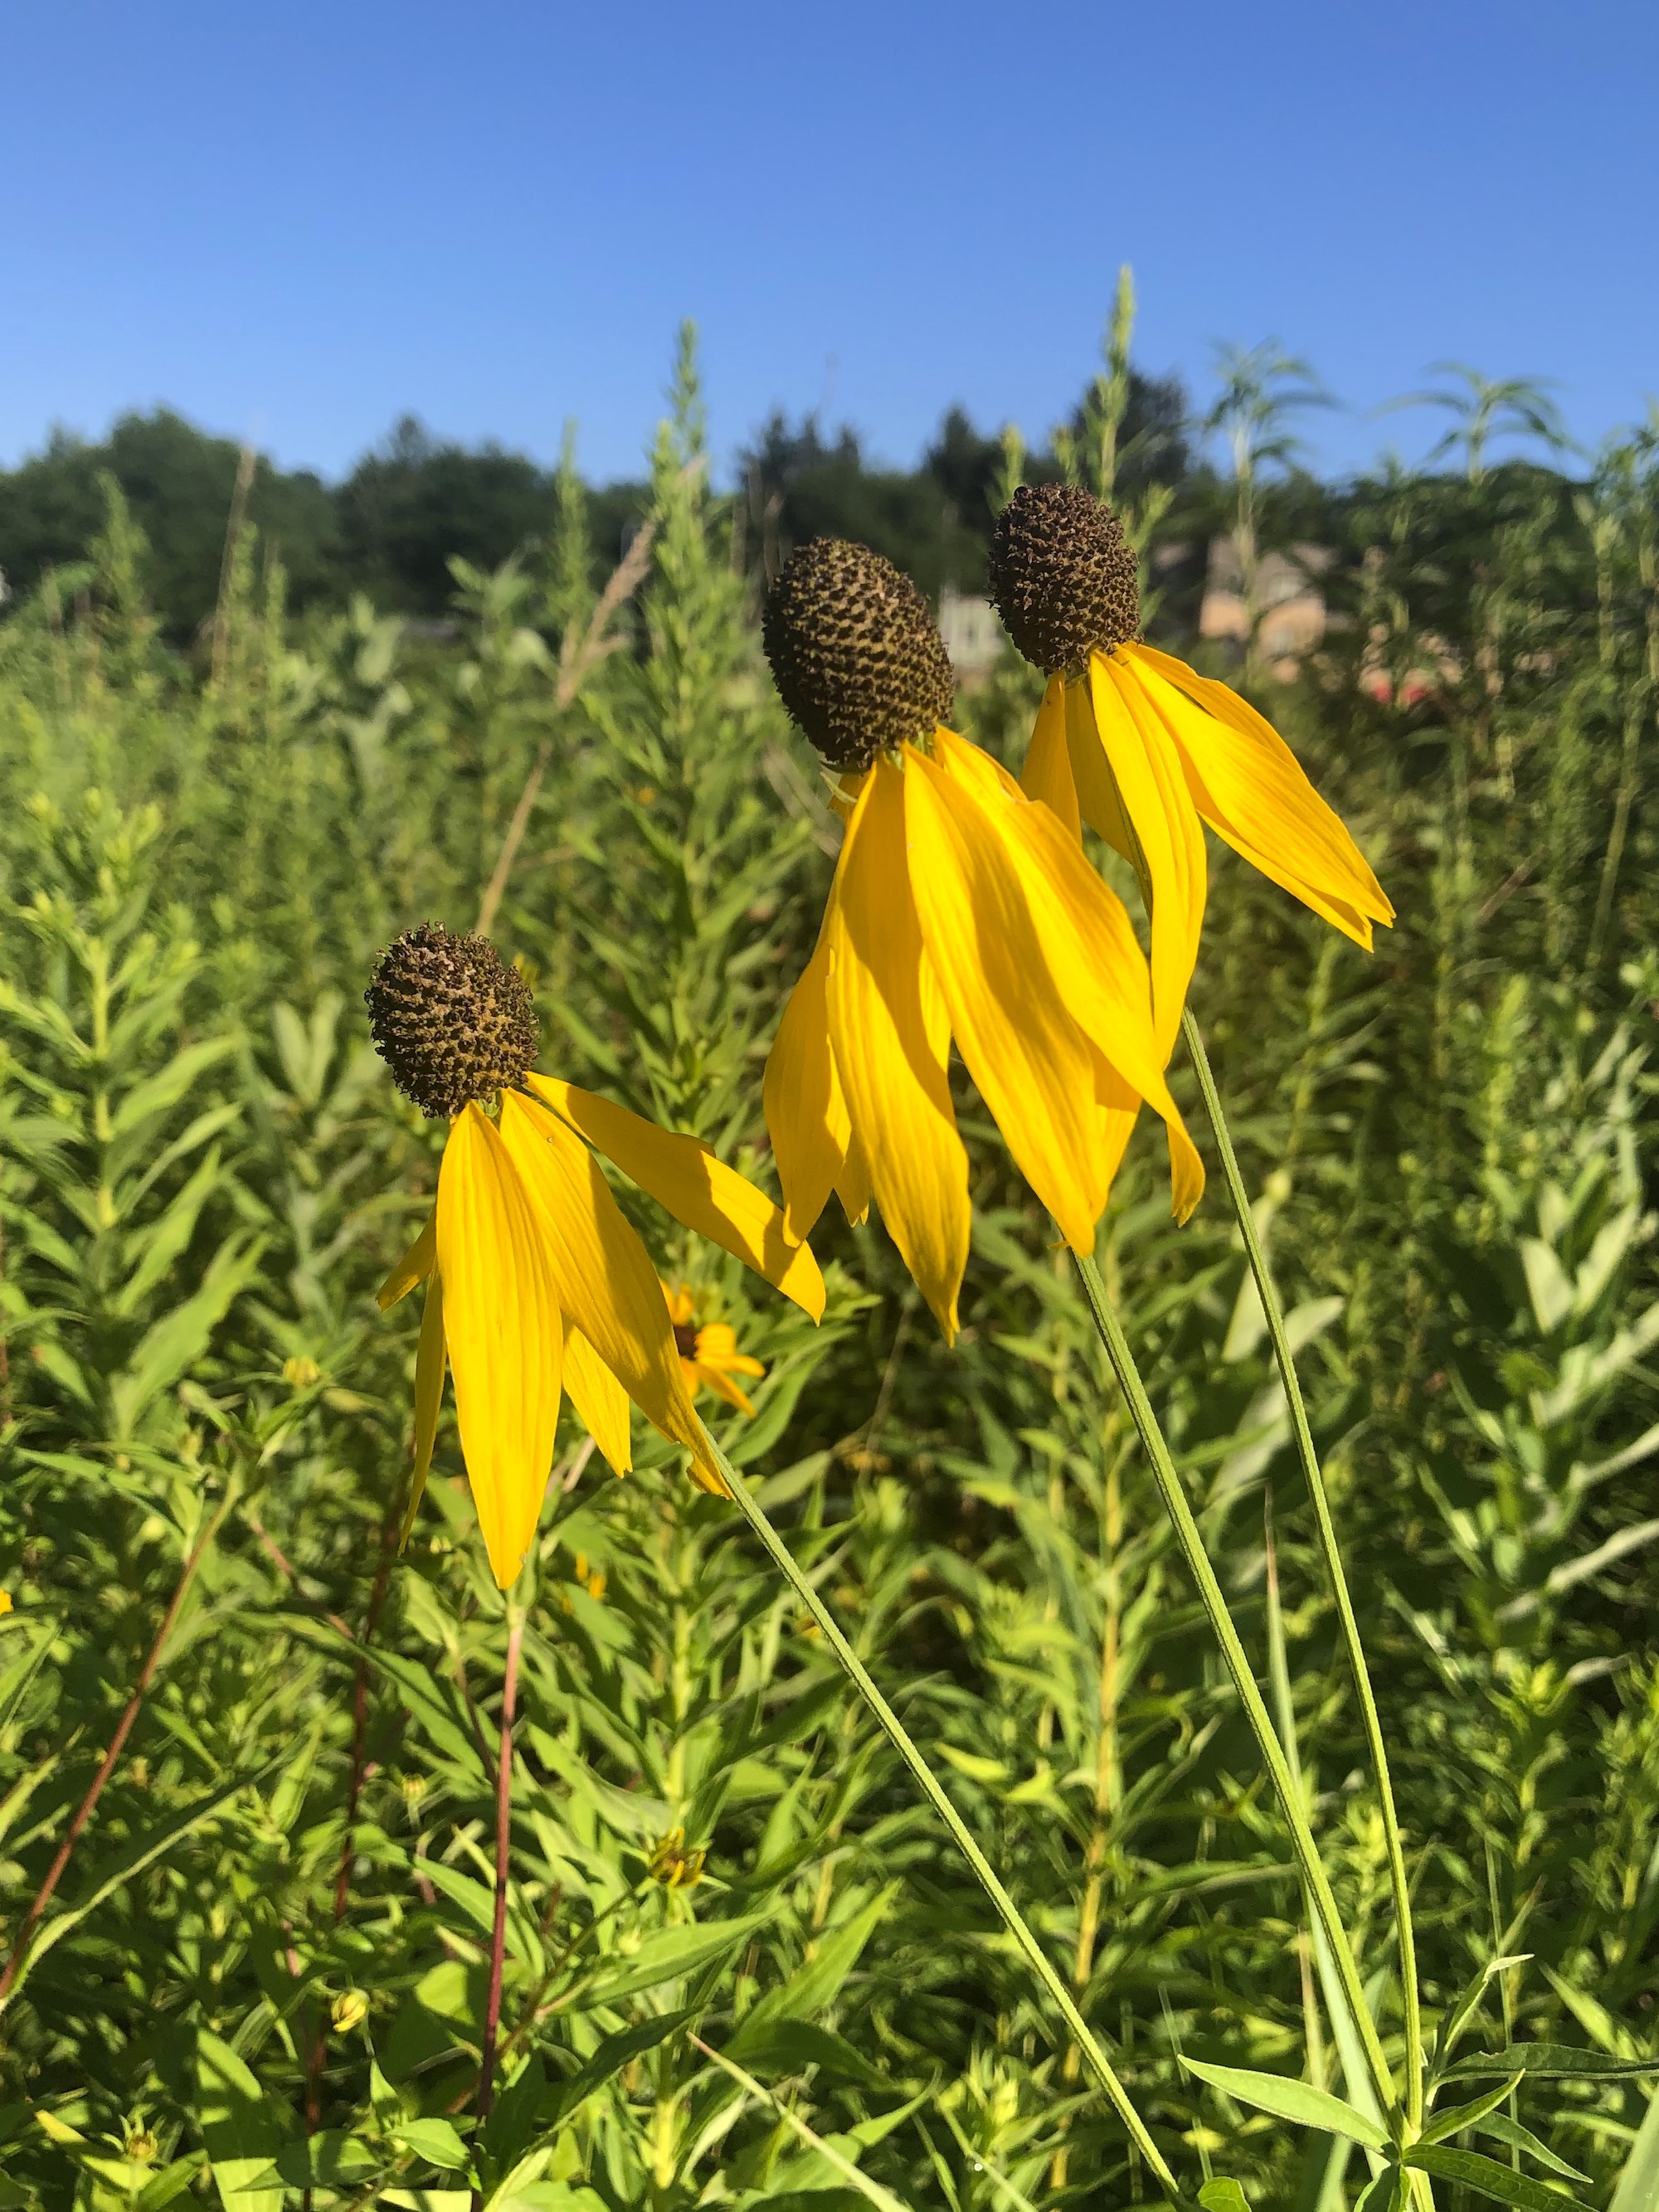 Gray-headed coneflower on shore of Marion Dunn Pond  in Madison, Wisconsin on July 29, 2020.